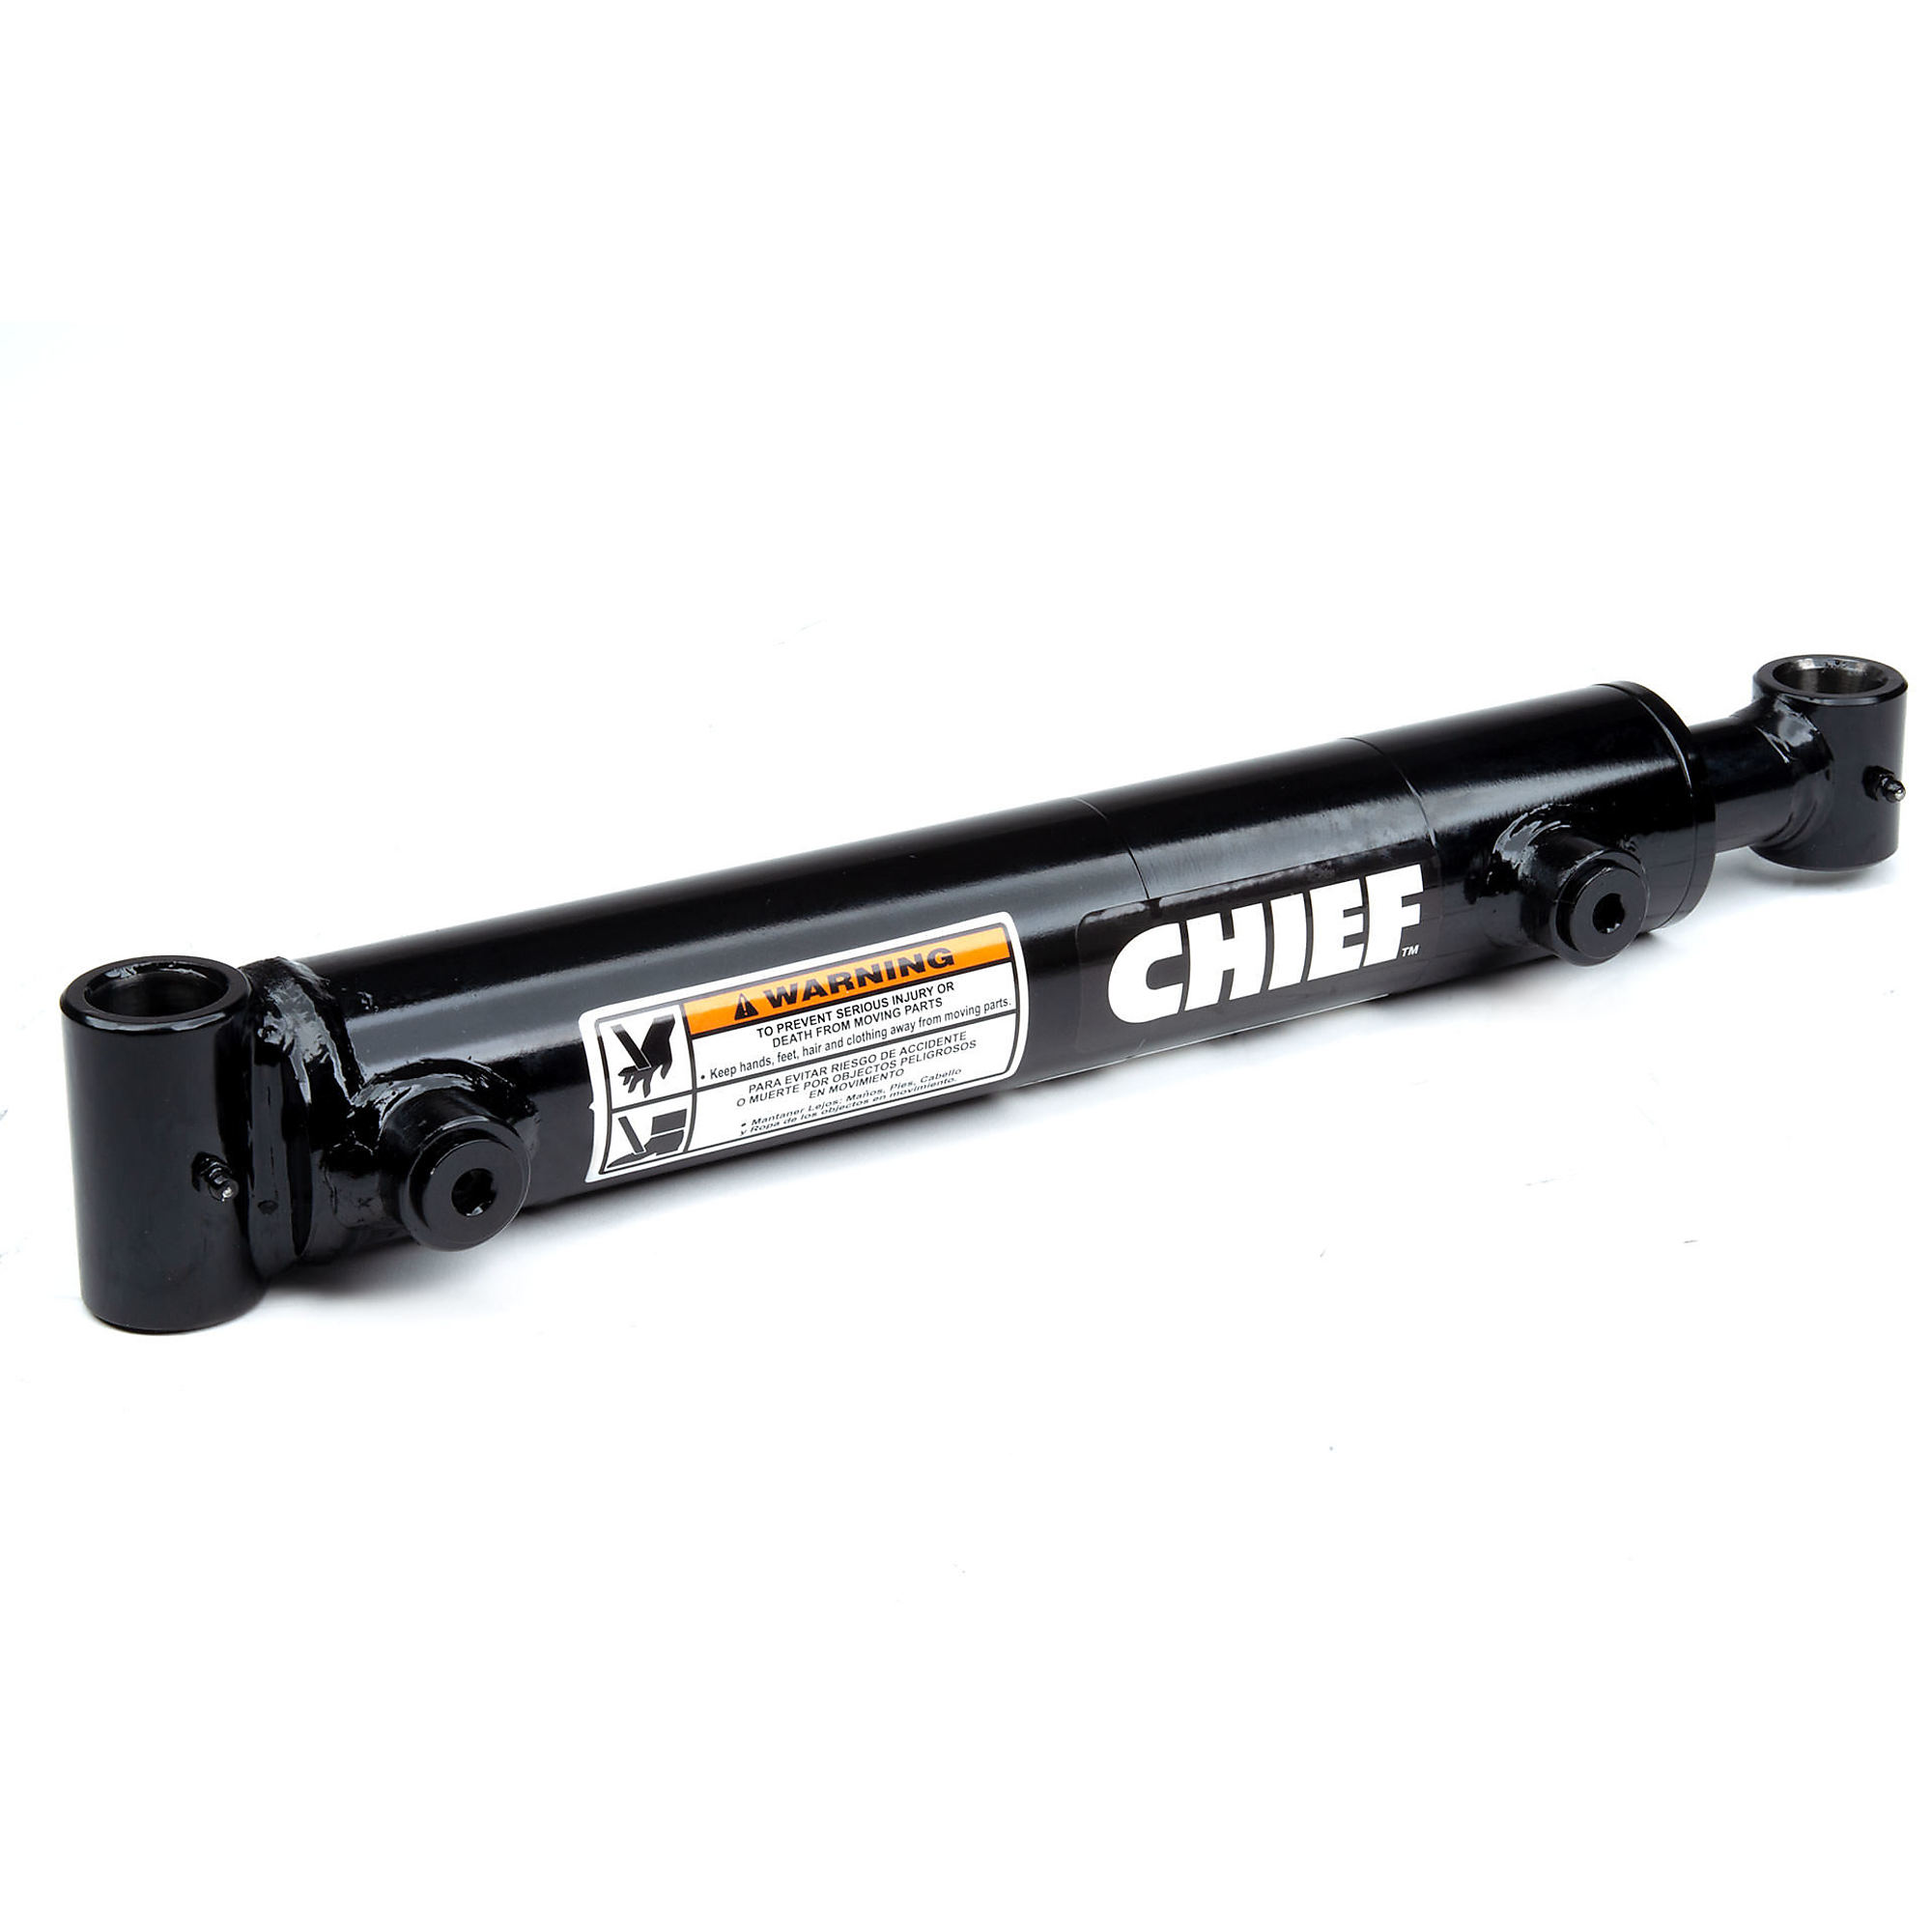 Chief, WC Welded Cylinder, Max. PSI 3000, Bore Diameter 5 in, Stroke Length 24 in, Model 216124